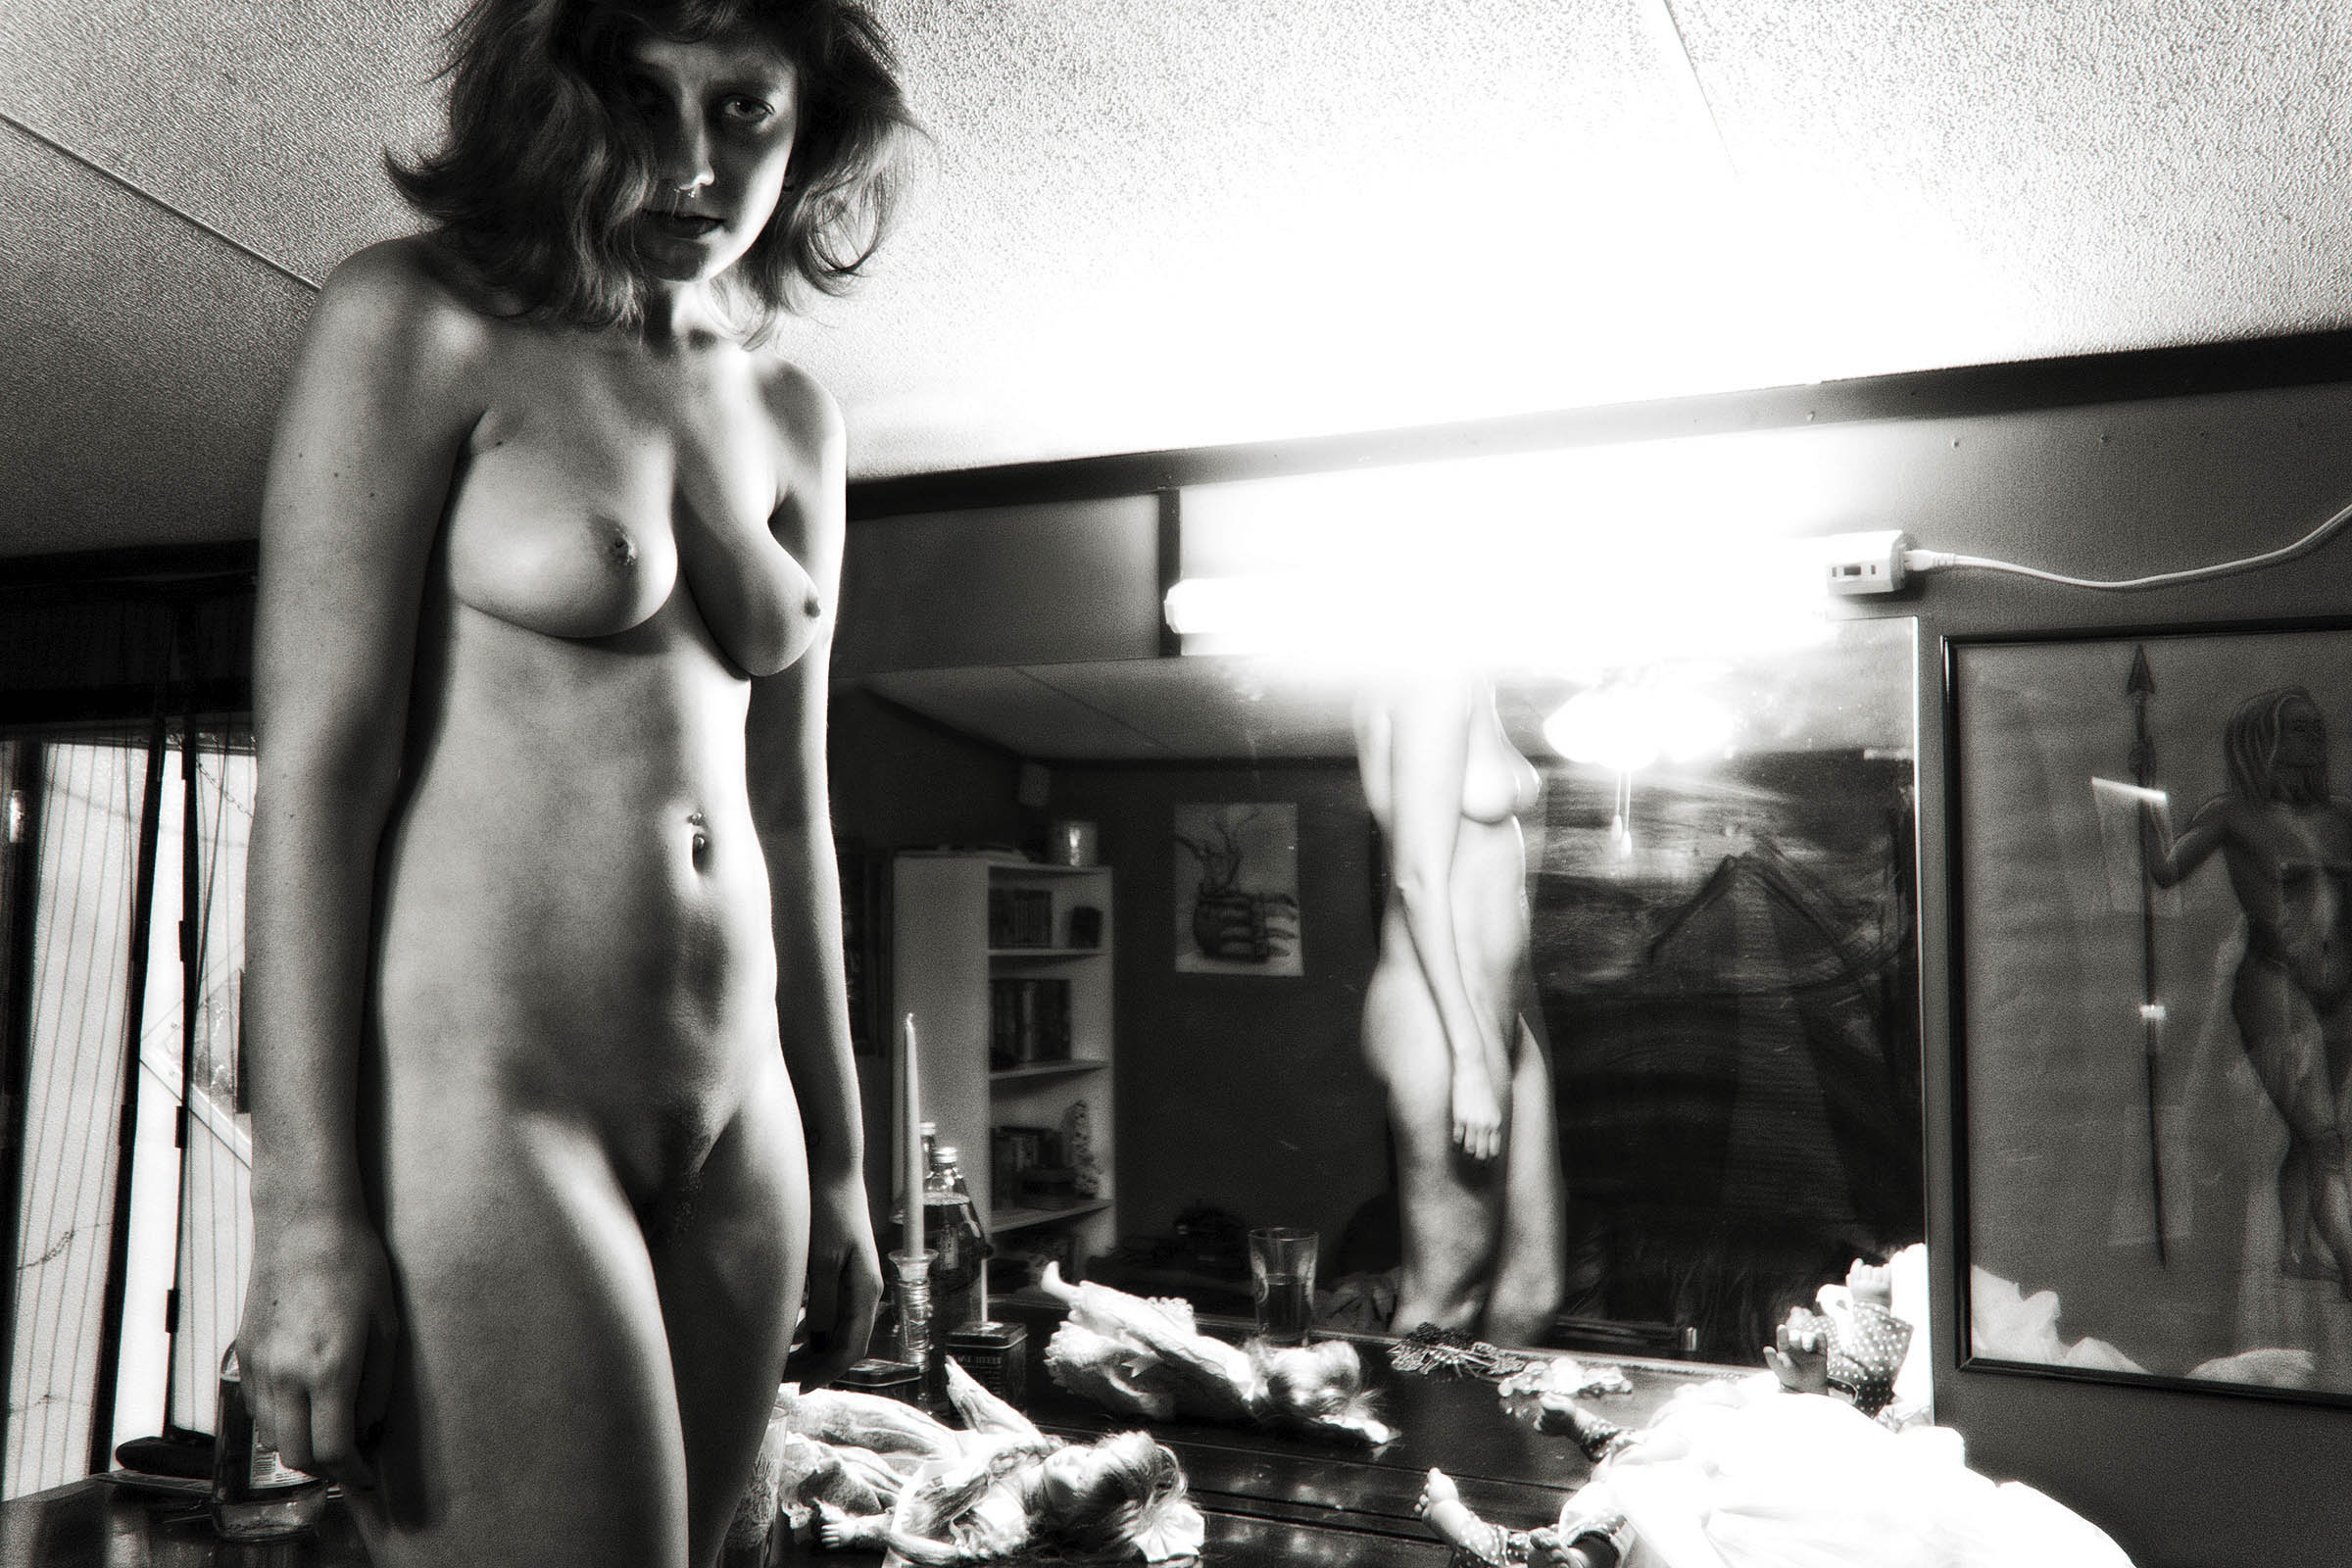 Gaffney SC Trailer Double Wide Nude Woman Mirror Painting Wick Beavers Best fine art Black and White Photographer in NYC New York City Los Angeles LA Vegas Boston Santa Fe Taos